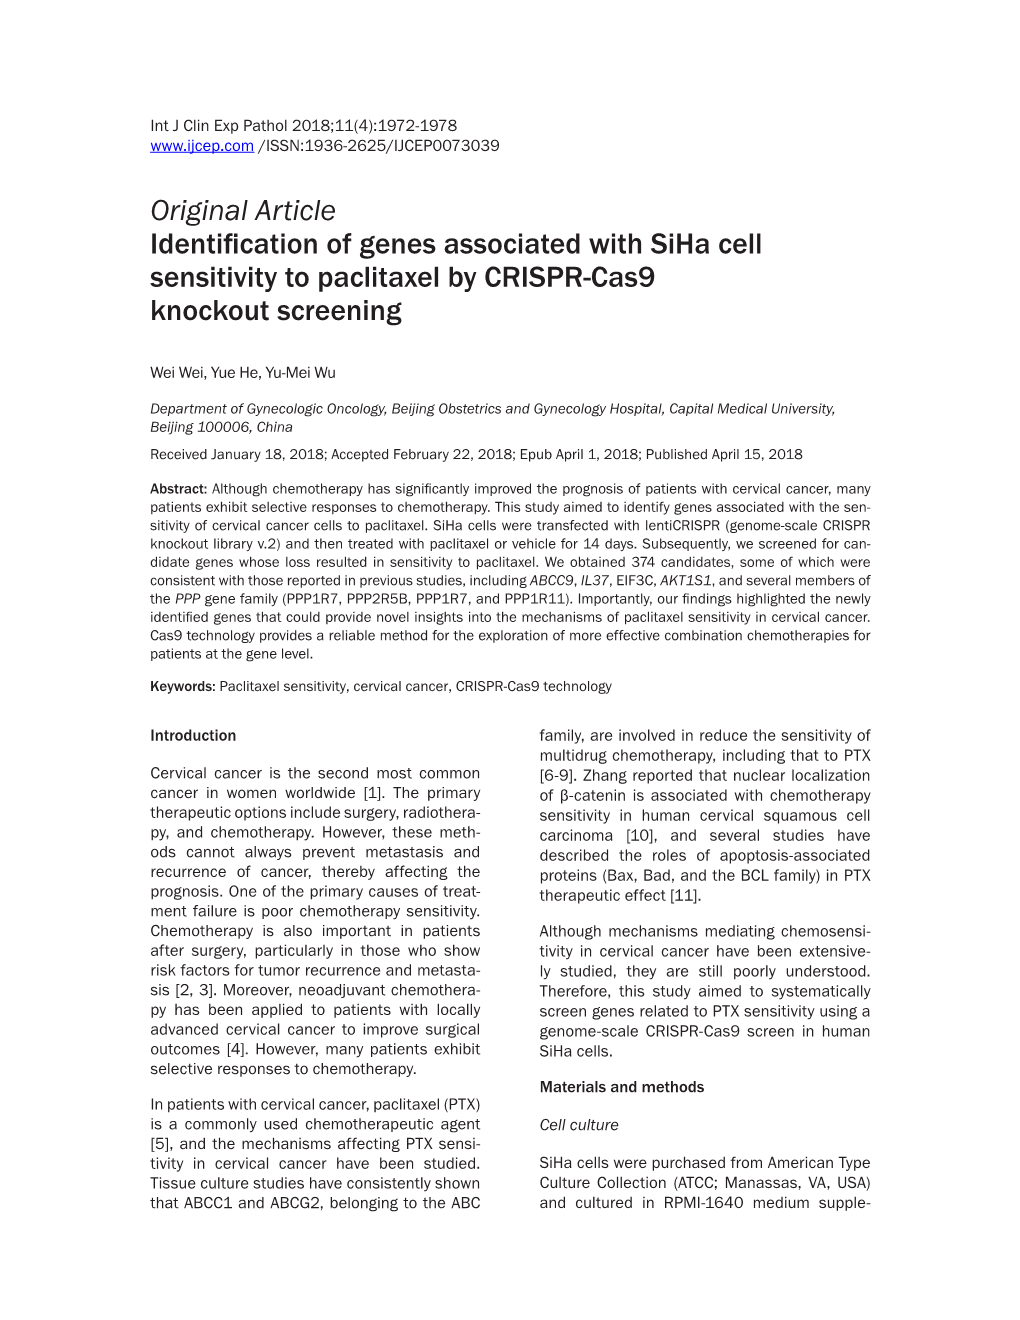 Original Article Identification of Genes Associated with Siha Cell Sensitivity to Paclitaxel by CRISPR-Cas9 Knockout Screening